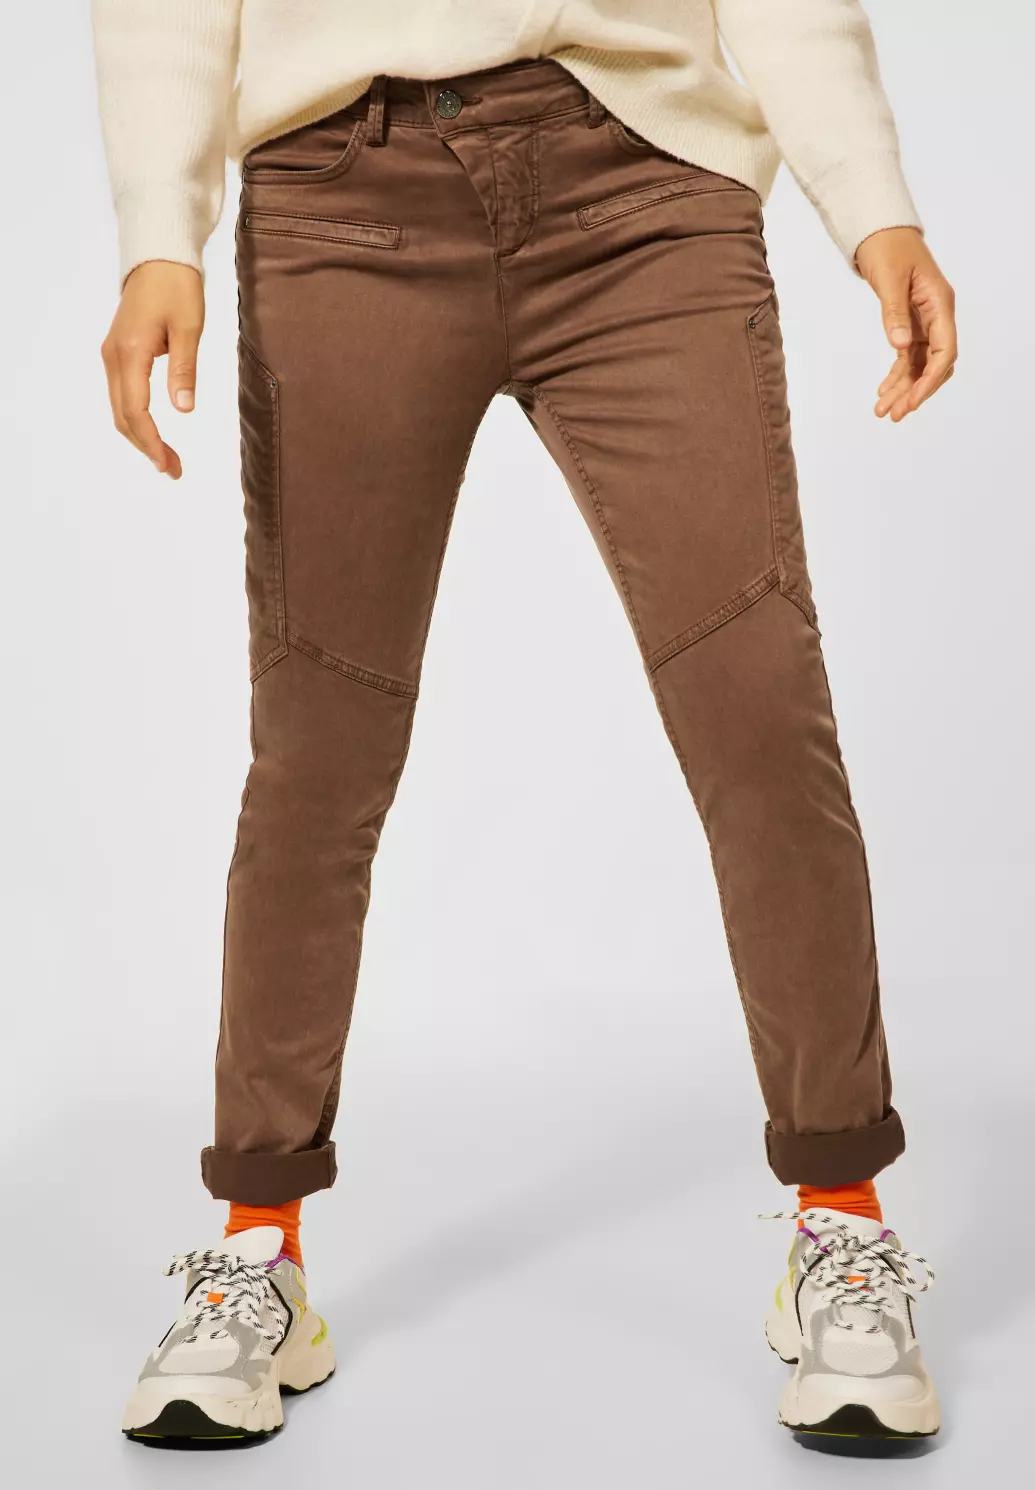 Blues | Fit Toffee Cotton - Street Slim in Hose - Lyocell One Soft / Braun